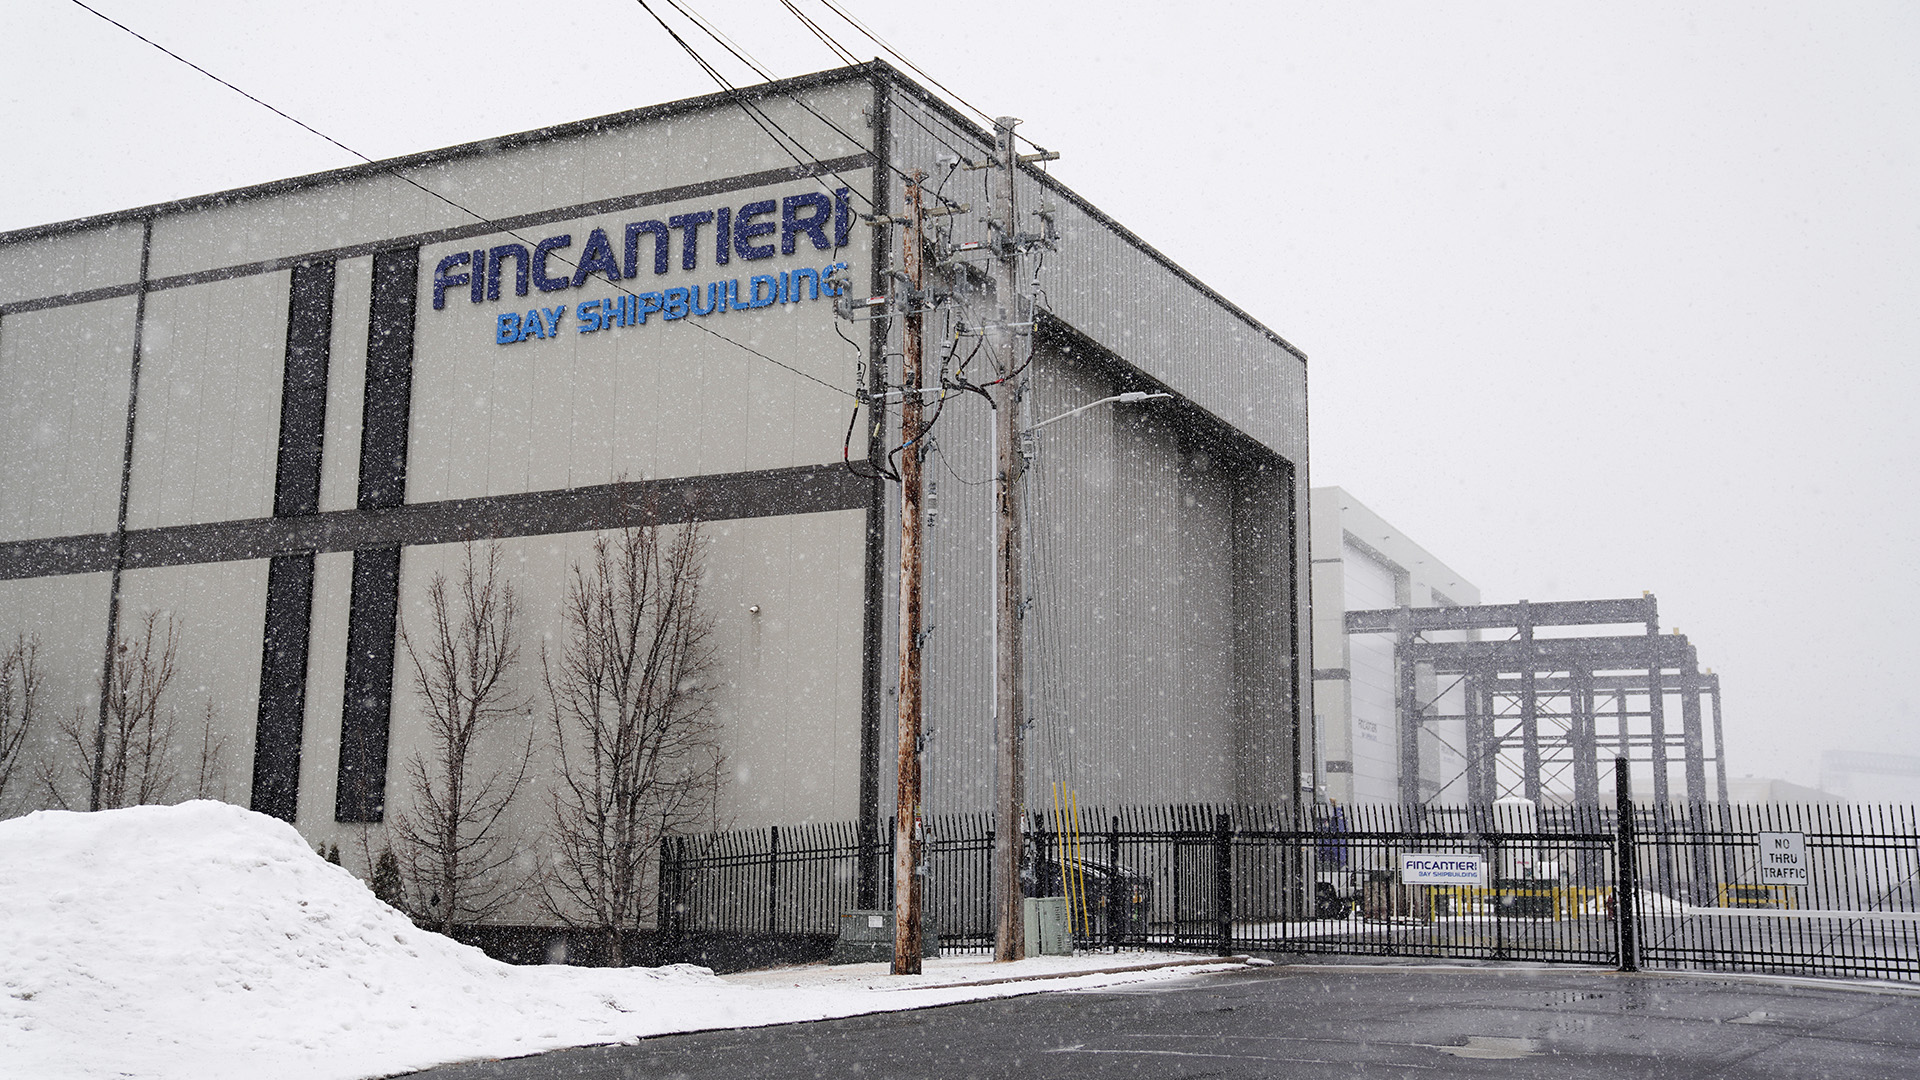 Snow flies around two multi-story buildings, connected to power lines and cranes, with one in the foreground bearing the wordmark "Fincantieri Bay Shipbuilding."